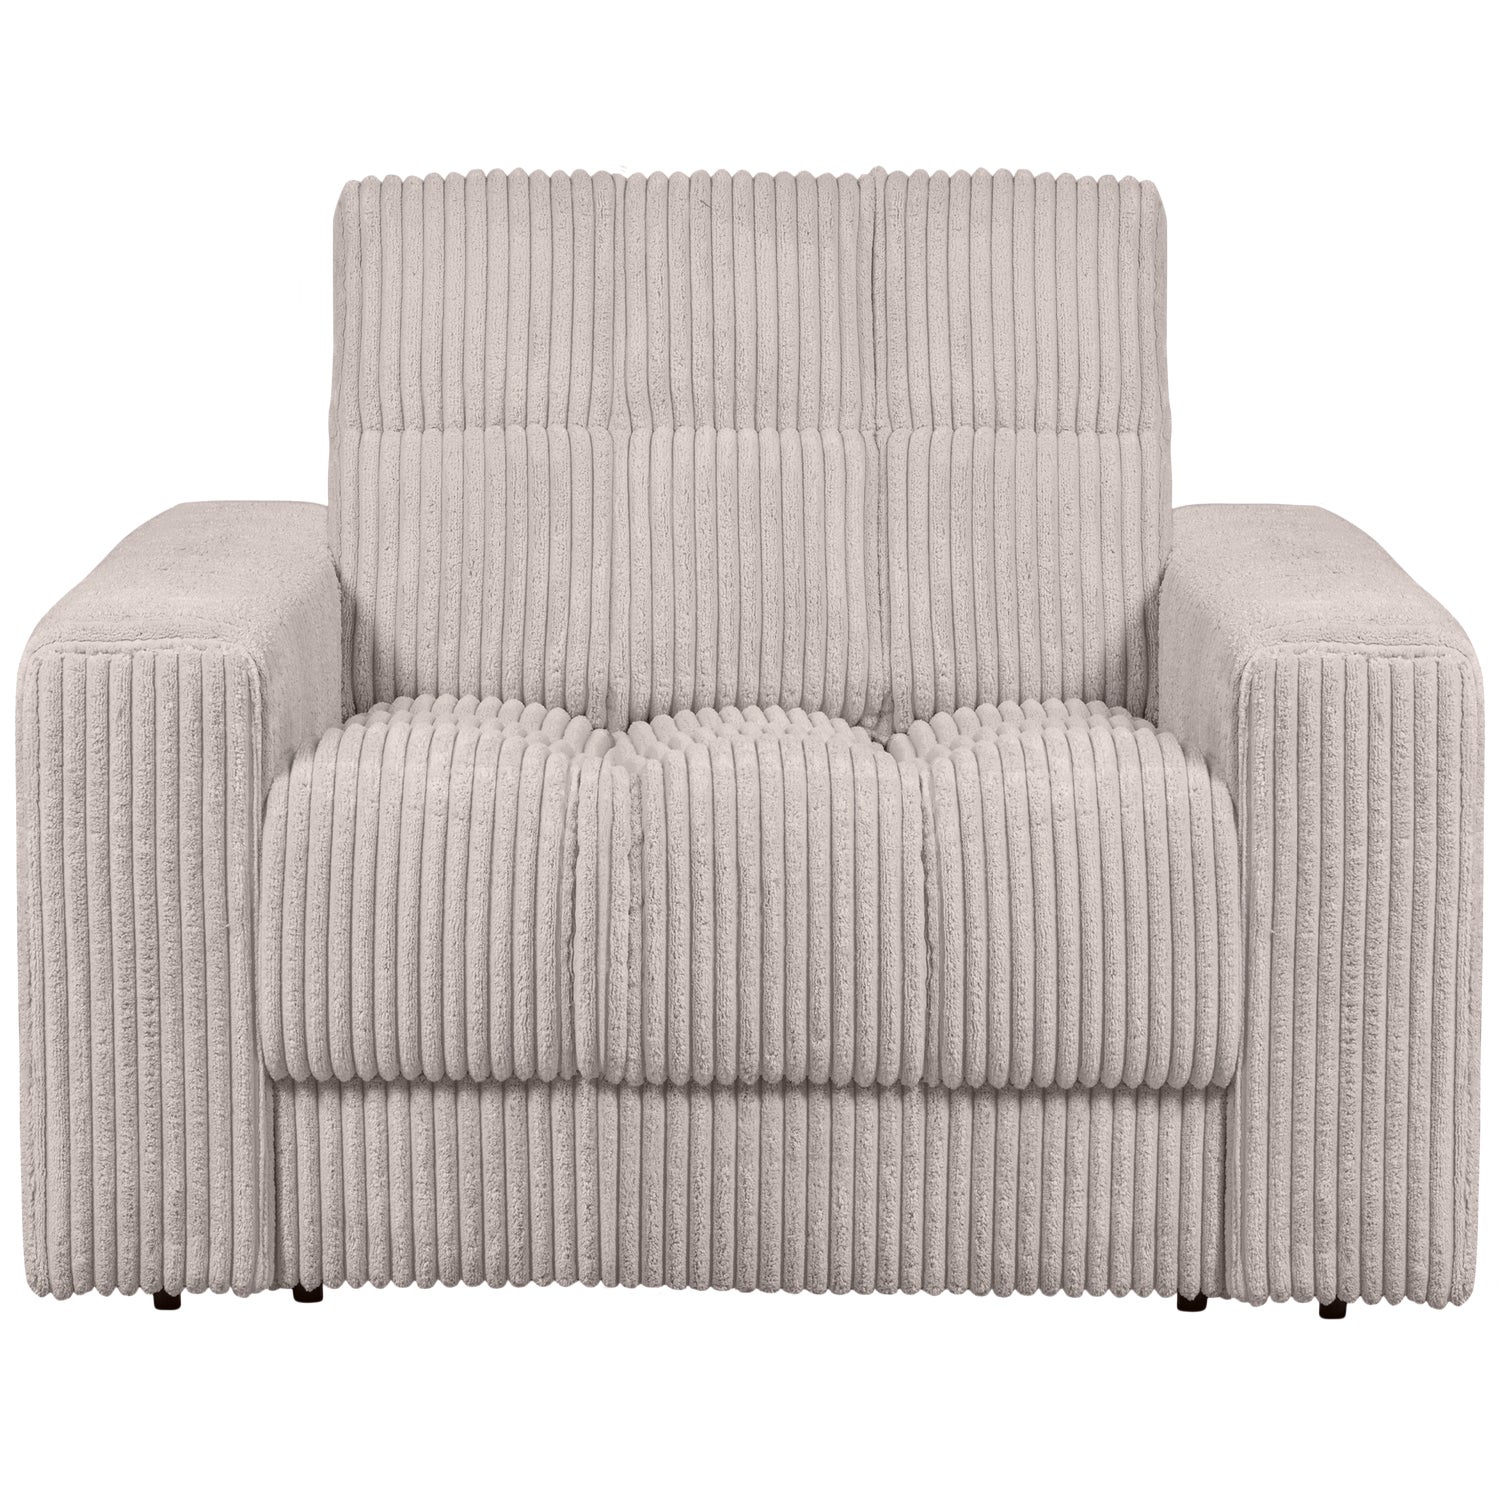 379003-RN-01_VS_WE_Second_date_fauteuil_grove_ribstof_naturel.png?auto=webp&format=png&width=1500&height=1500